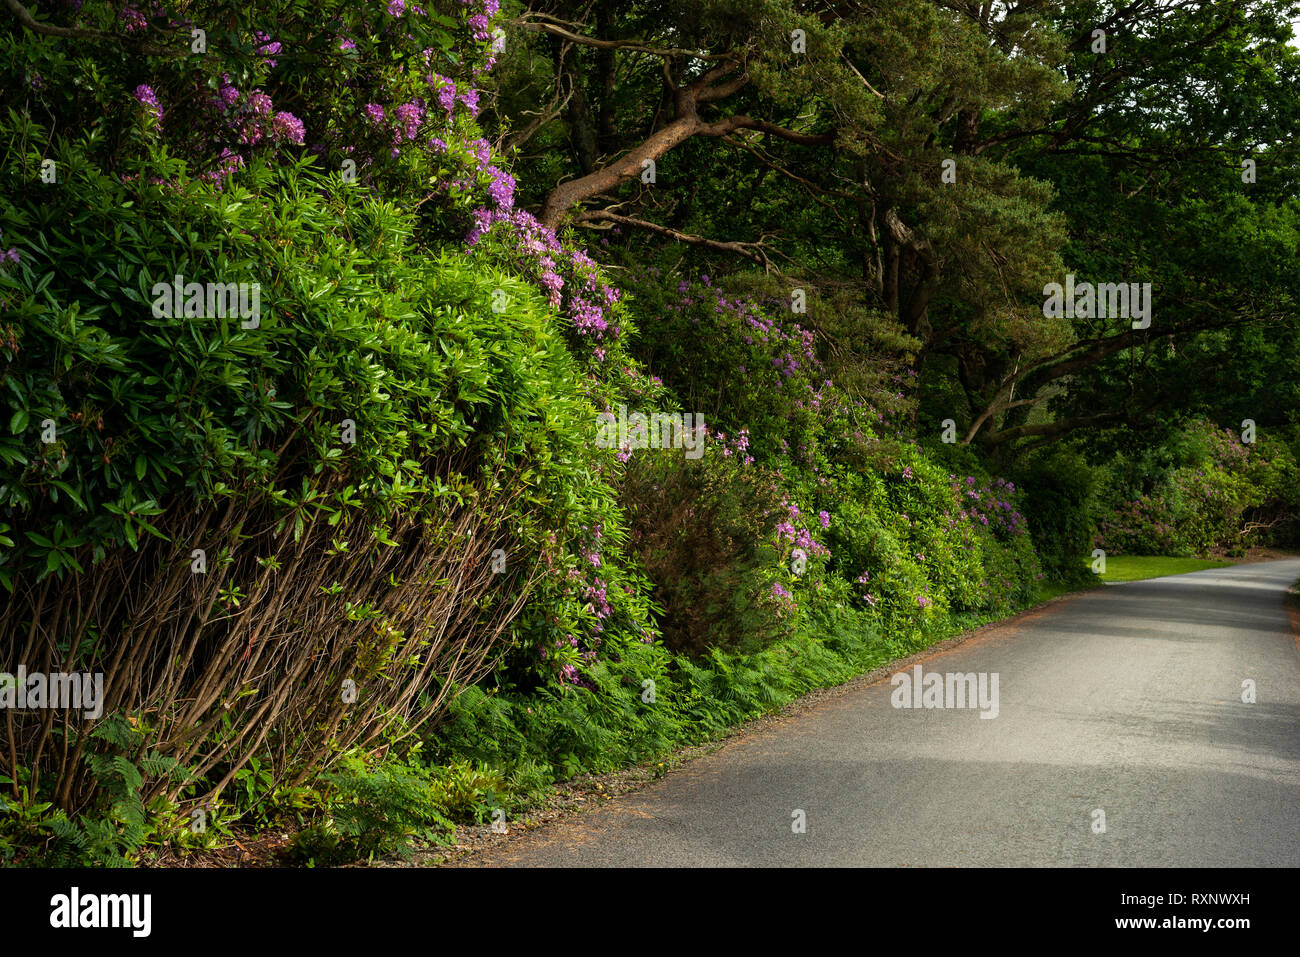 Wild Rhododendron bloom by an alley pathway in Killarney National Park, County Kerry, Ireland, Europe Stock Photo